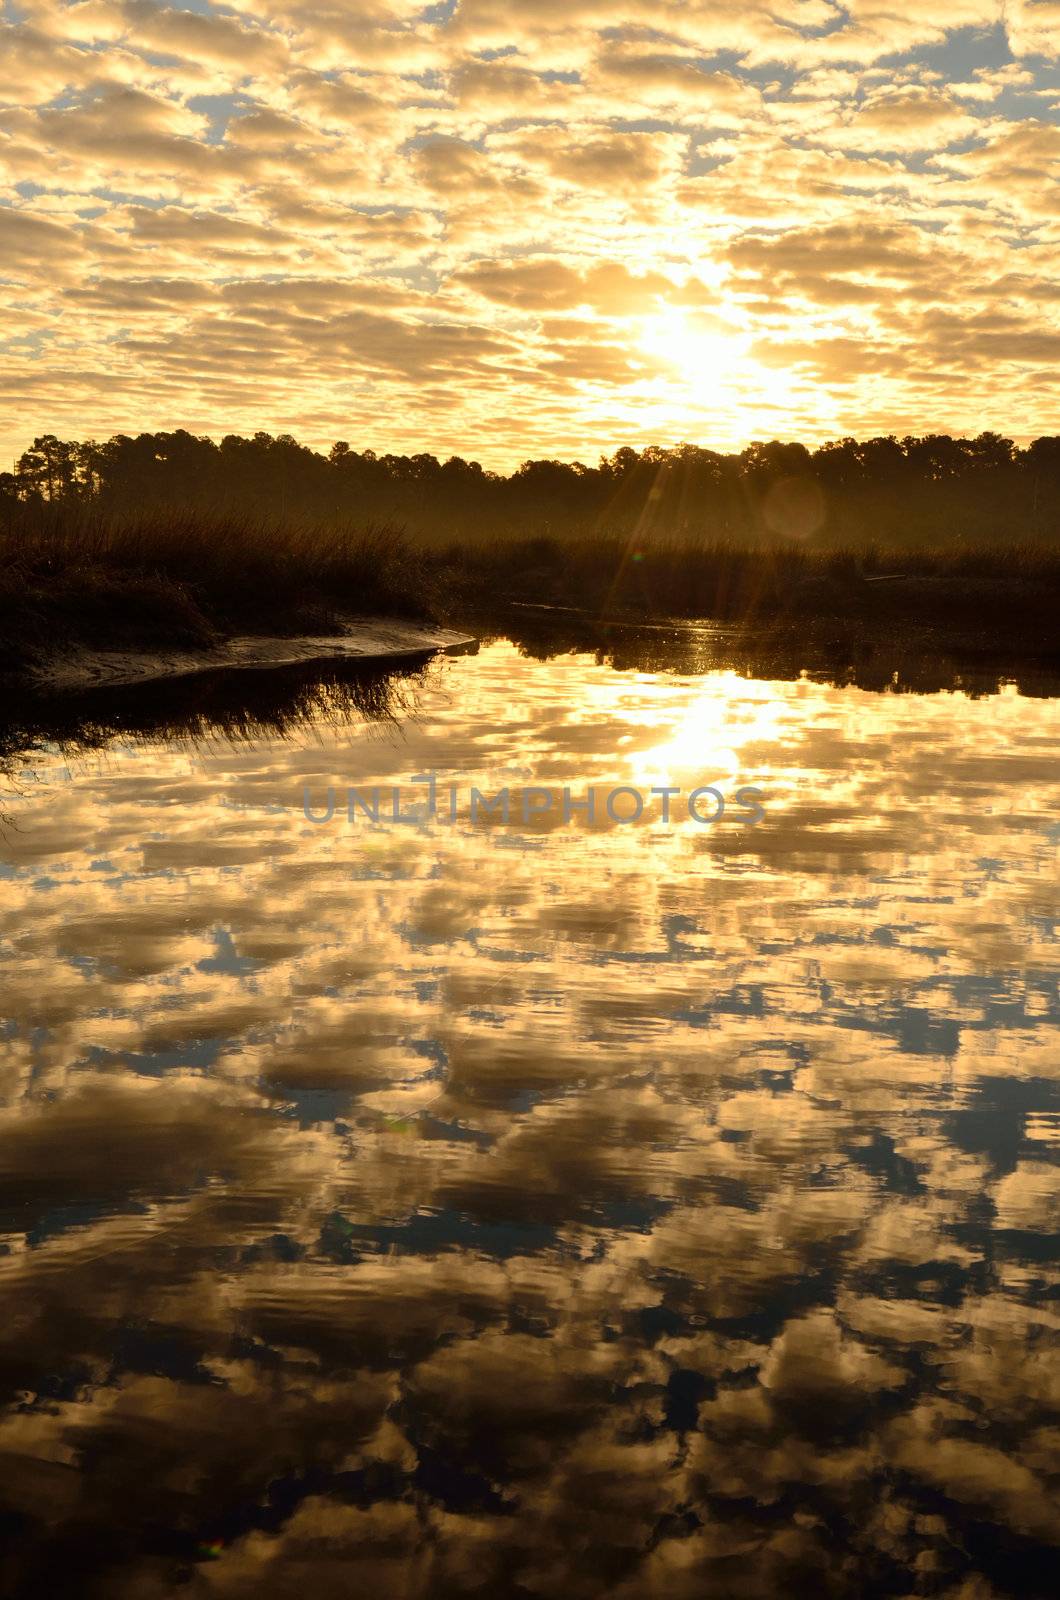 Clouds dominate a sunrise over Borrell Creek in Saint Marys, Georgia, Photo by Jackie DeBusk